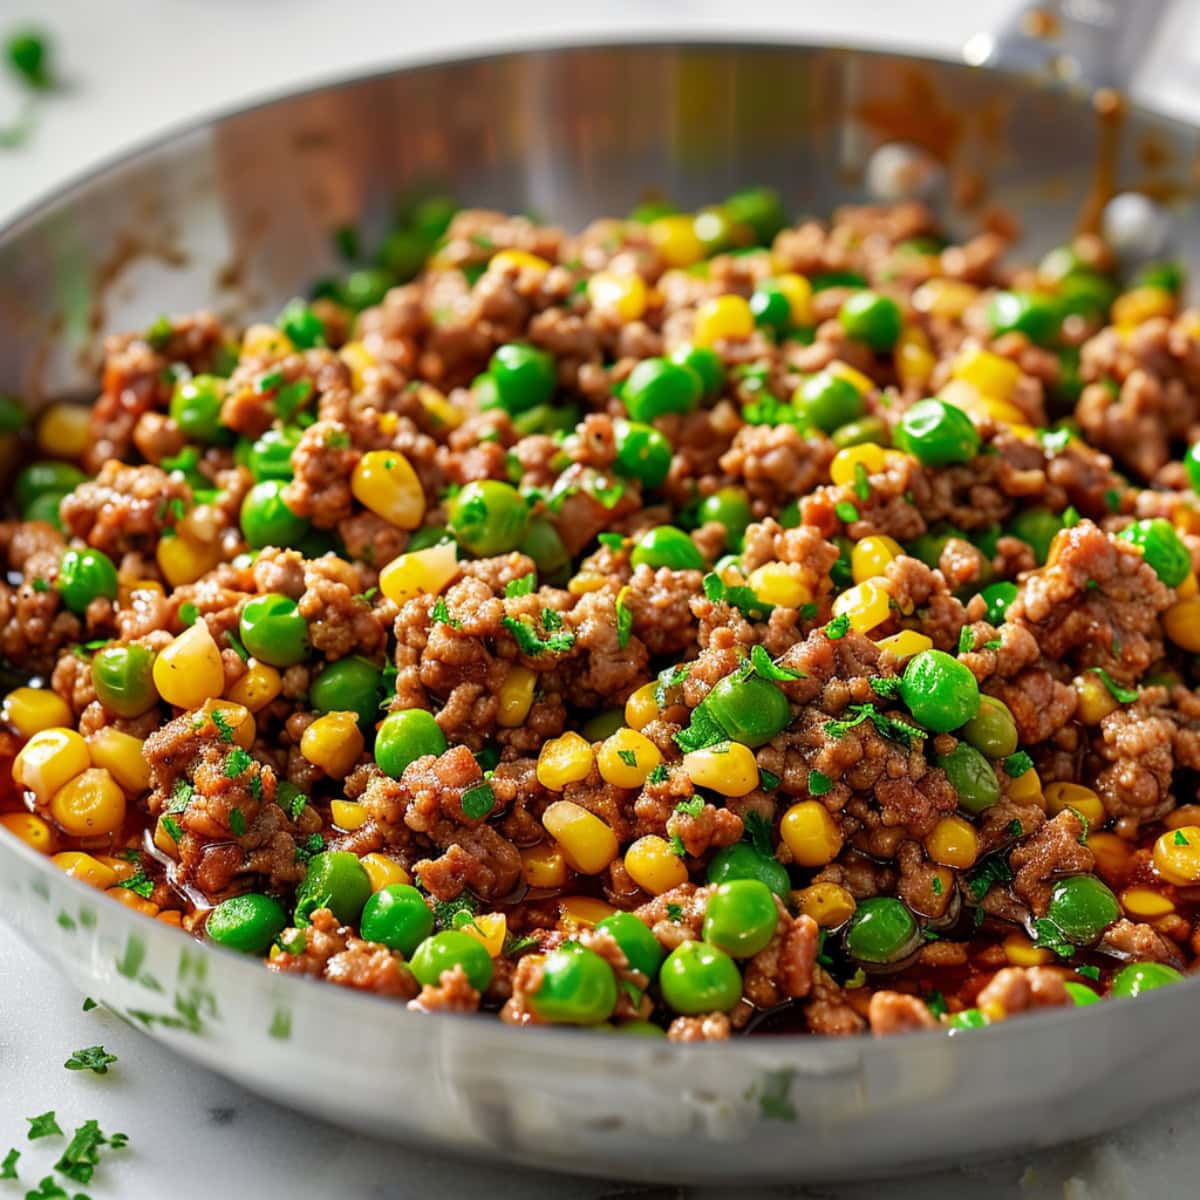 Sauteed ground lamb with green peas and corn kernels in a stainless pan.